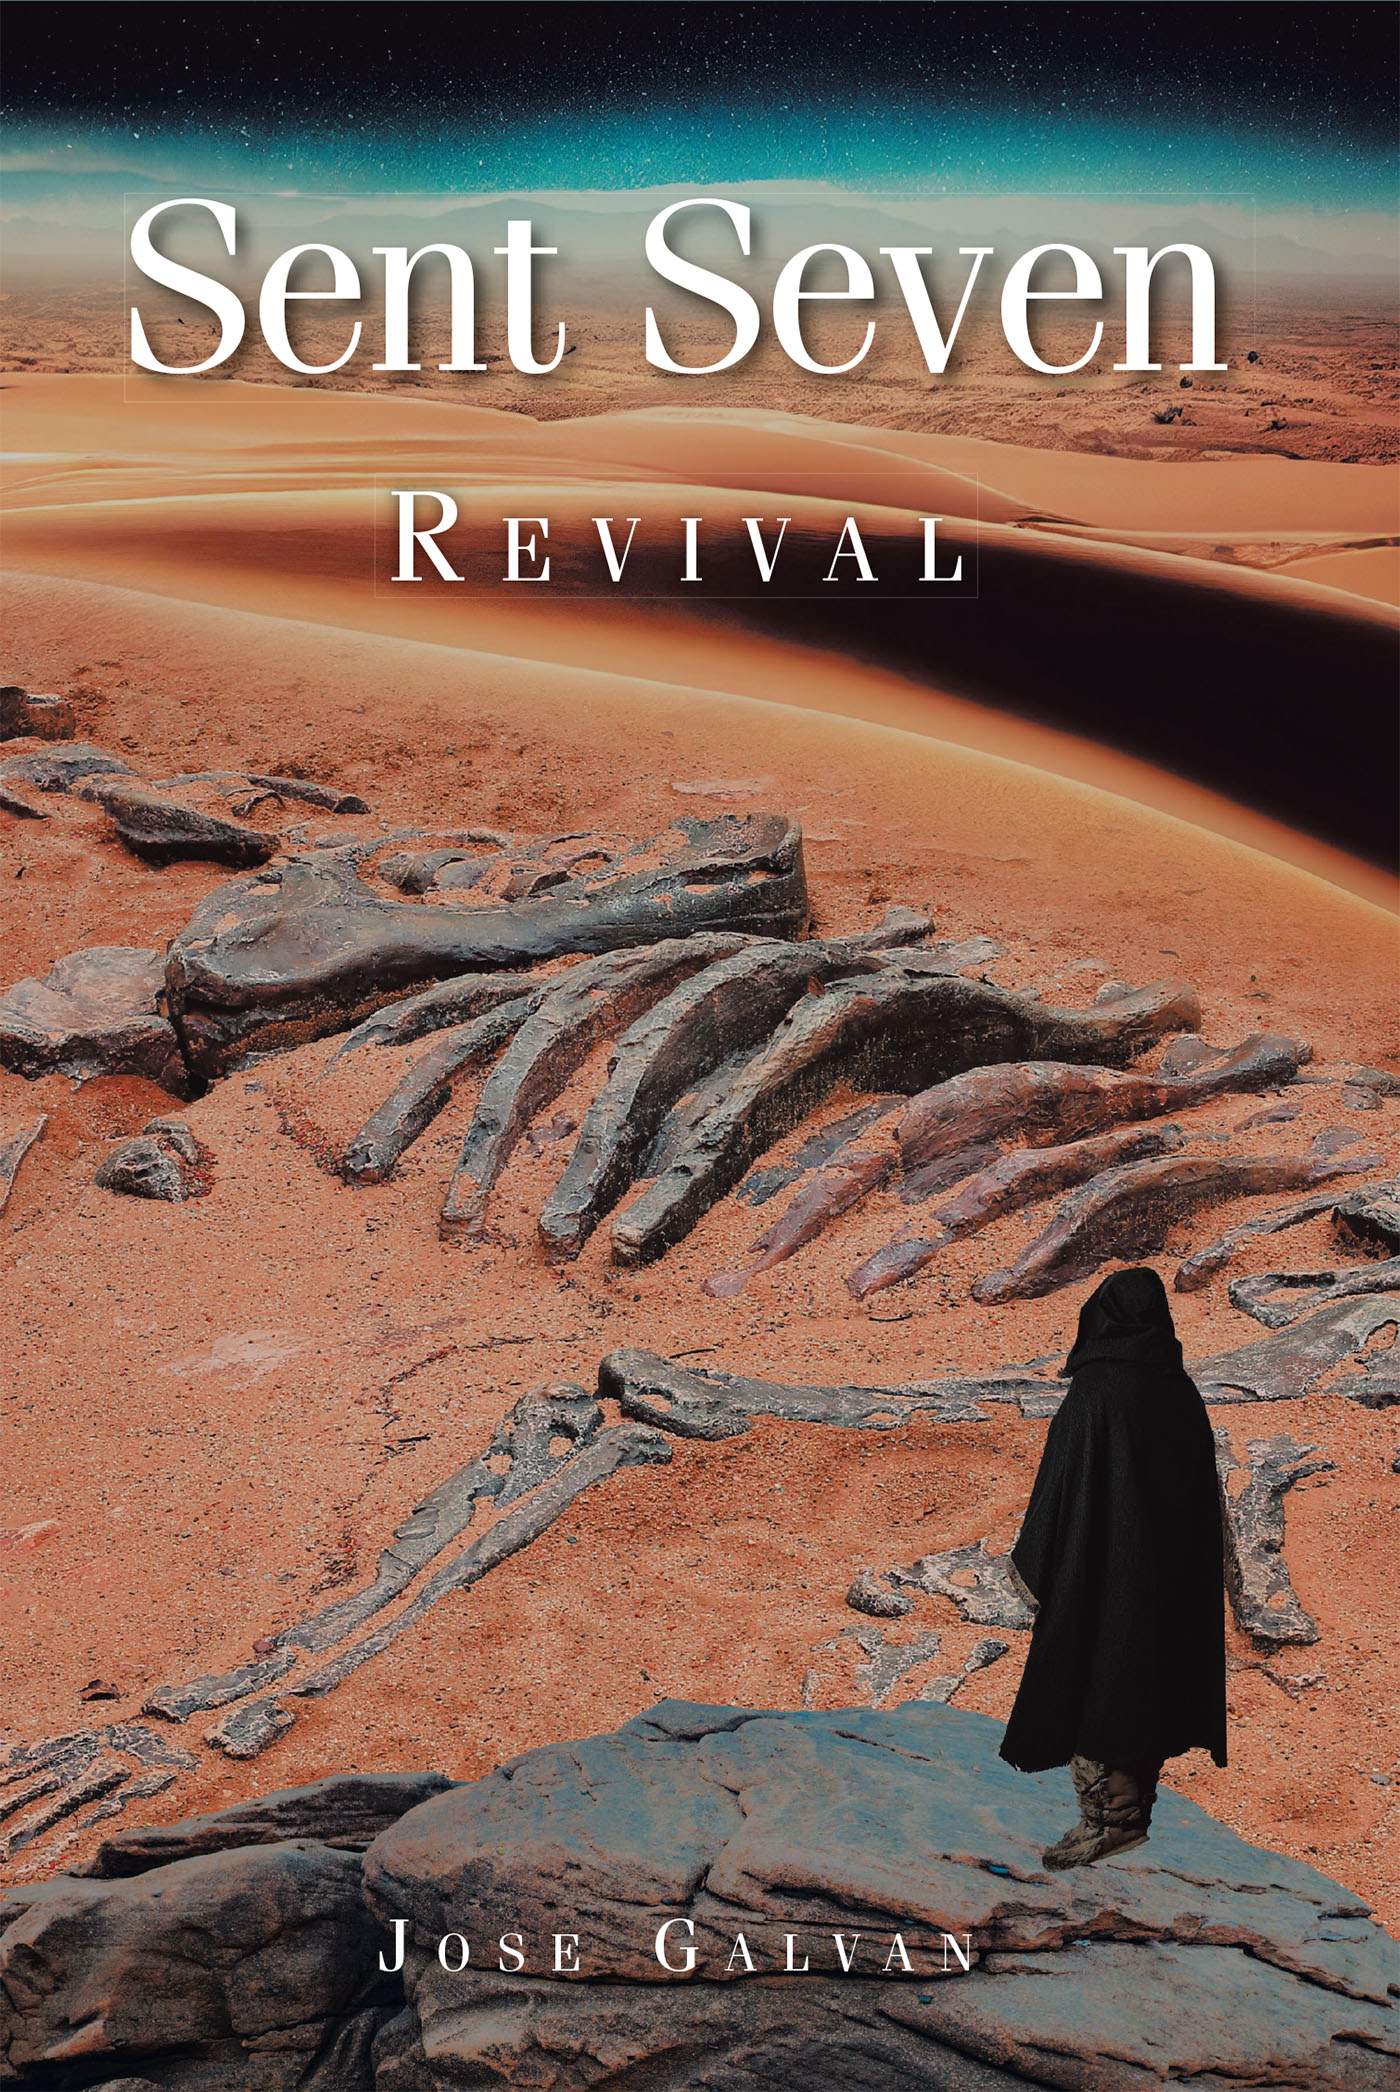 Jose Galvan’s Newly Released "Sent Seven: Revival" is a Compelling Science Fiction That Takes Readers to a War-Torn Land of Burgeoning Revolution